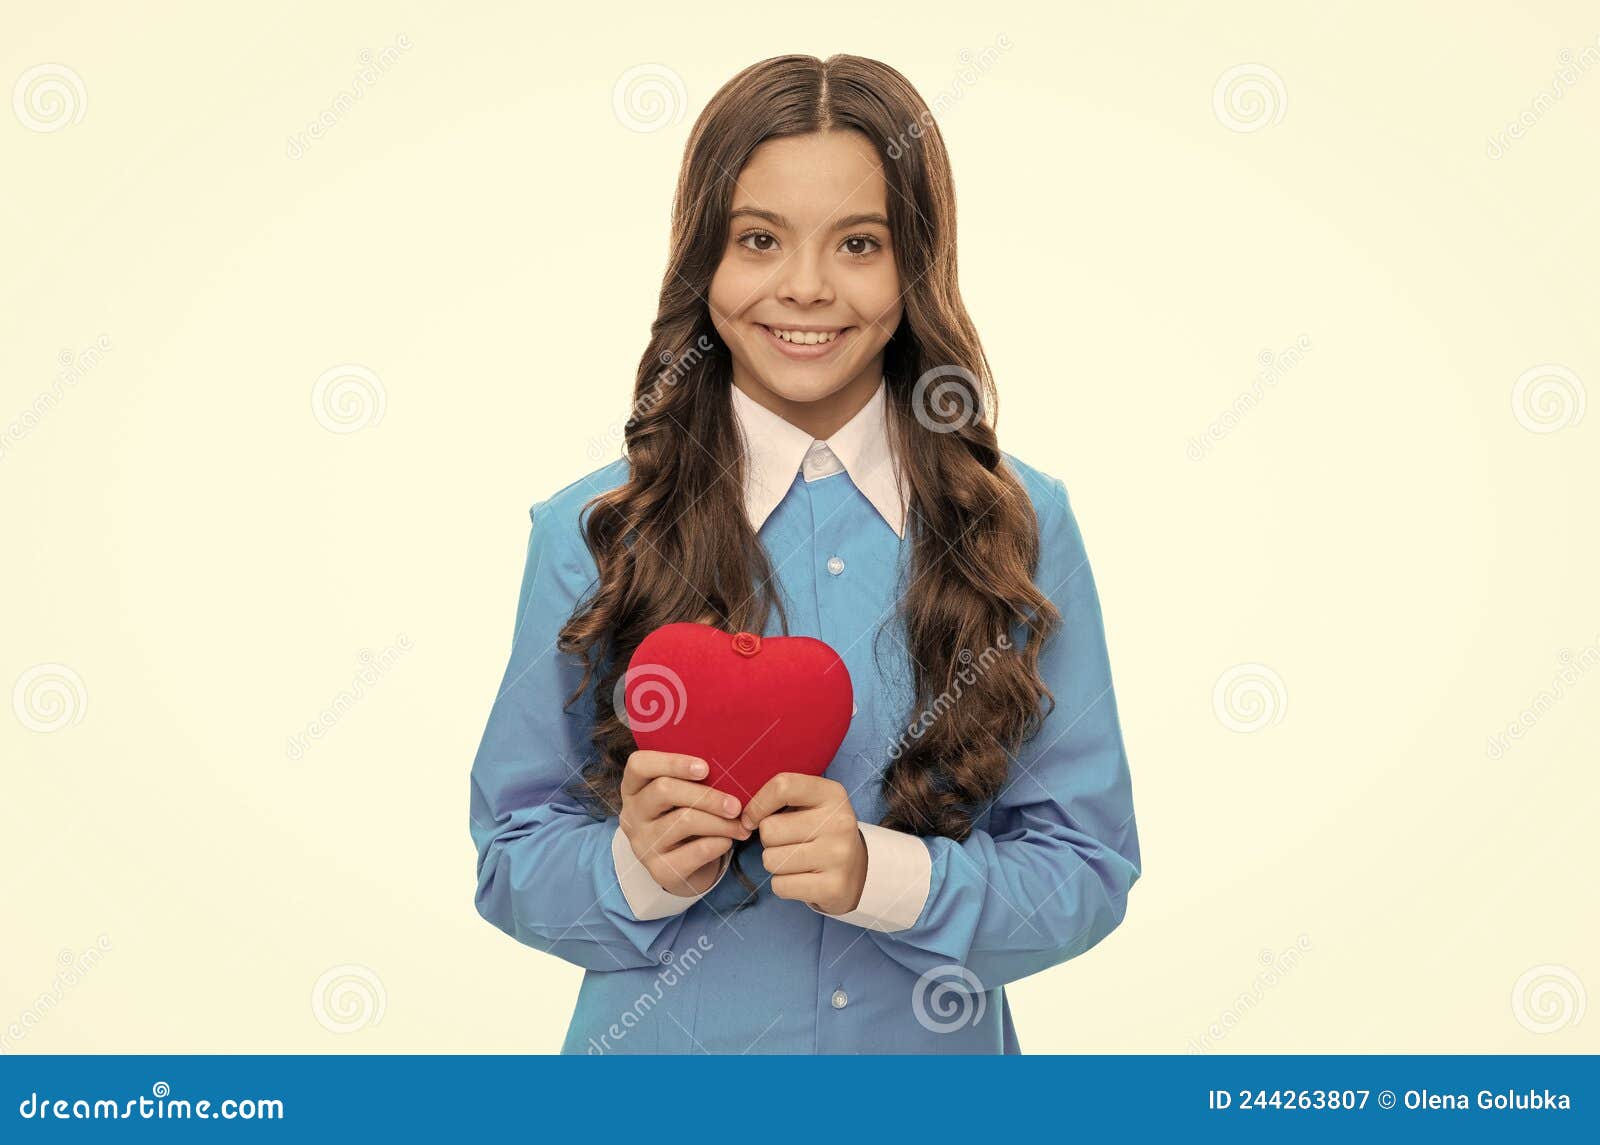 its curable disease. happy kid hold red heart. providing cardiovascular care. pediatric health care